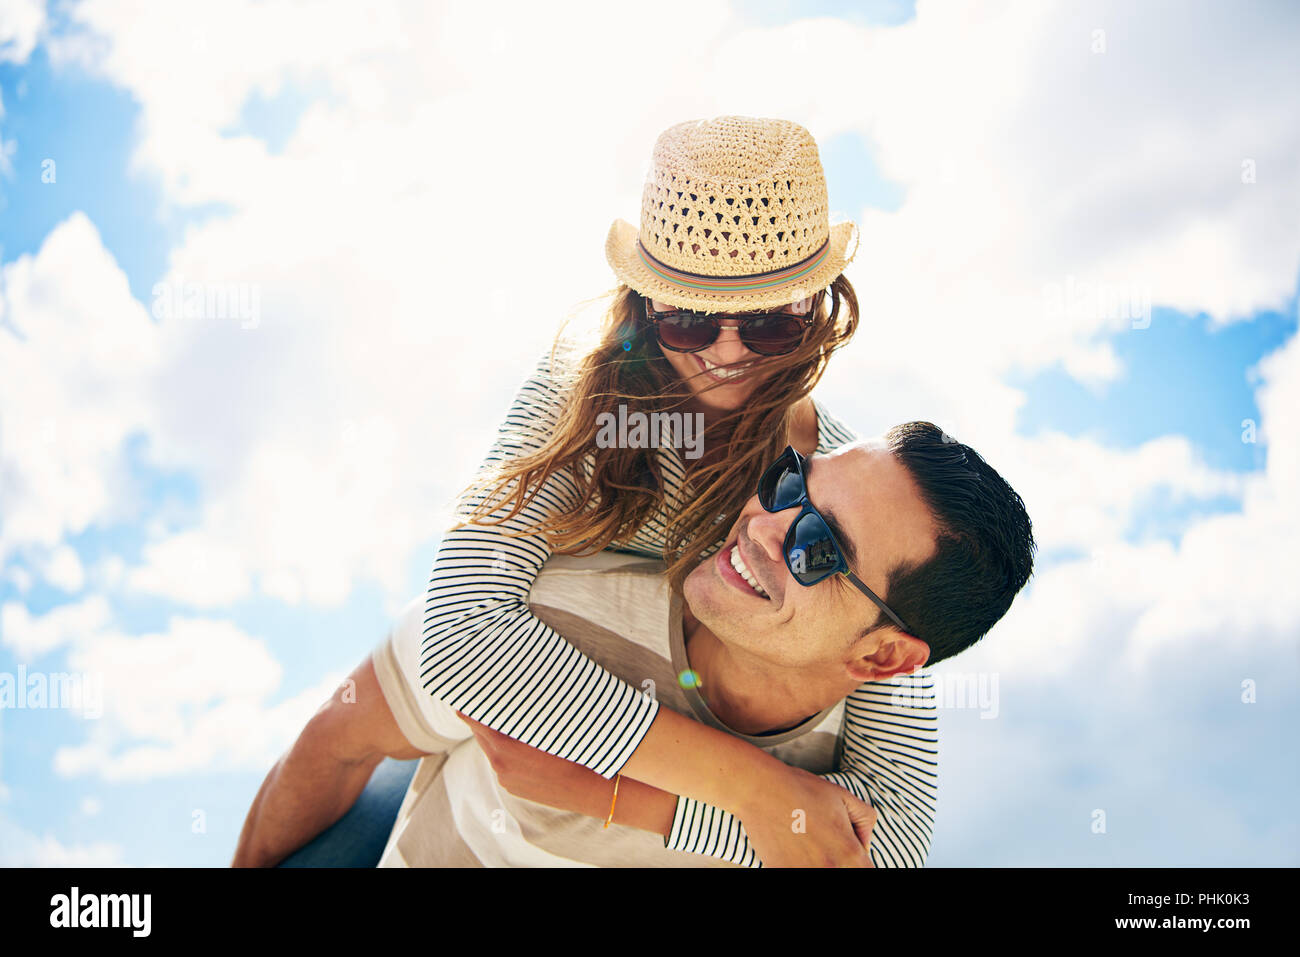 Handsome young man with his loving wife or girlfriend having fun relaxing on summer vacation piggy back riding against a sunny cloudy blue sky Stock Photo